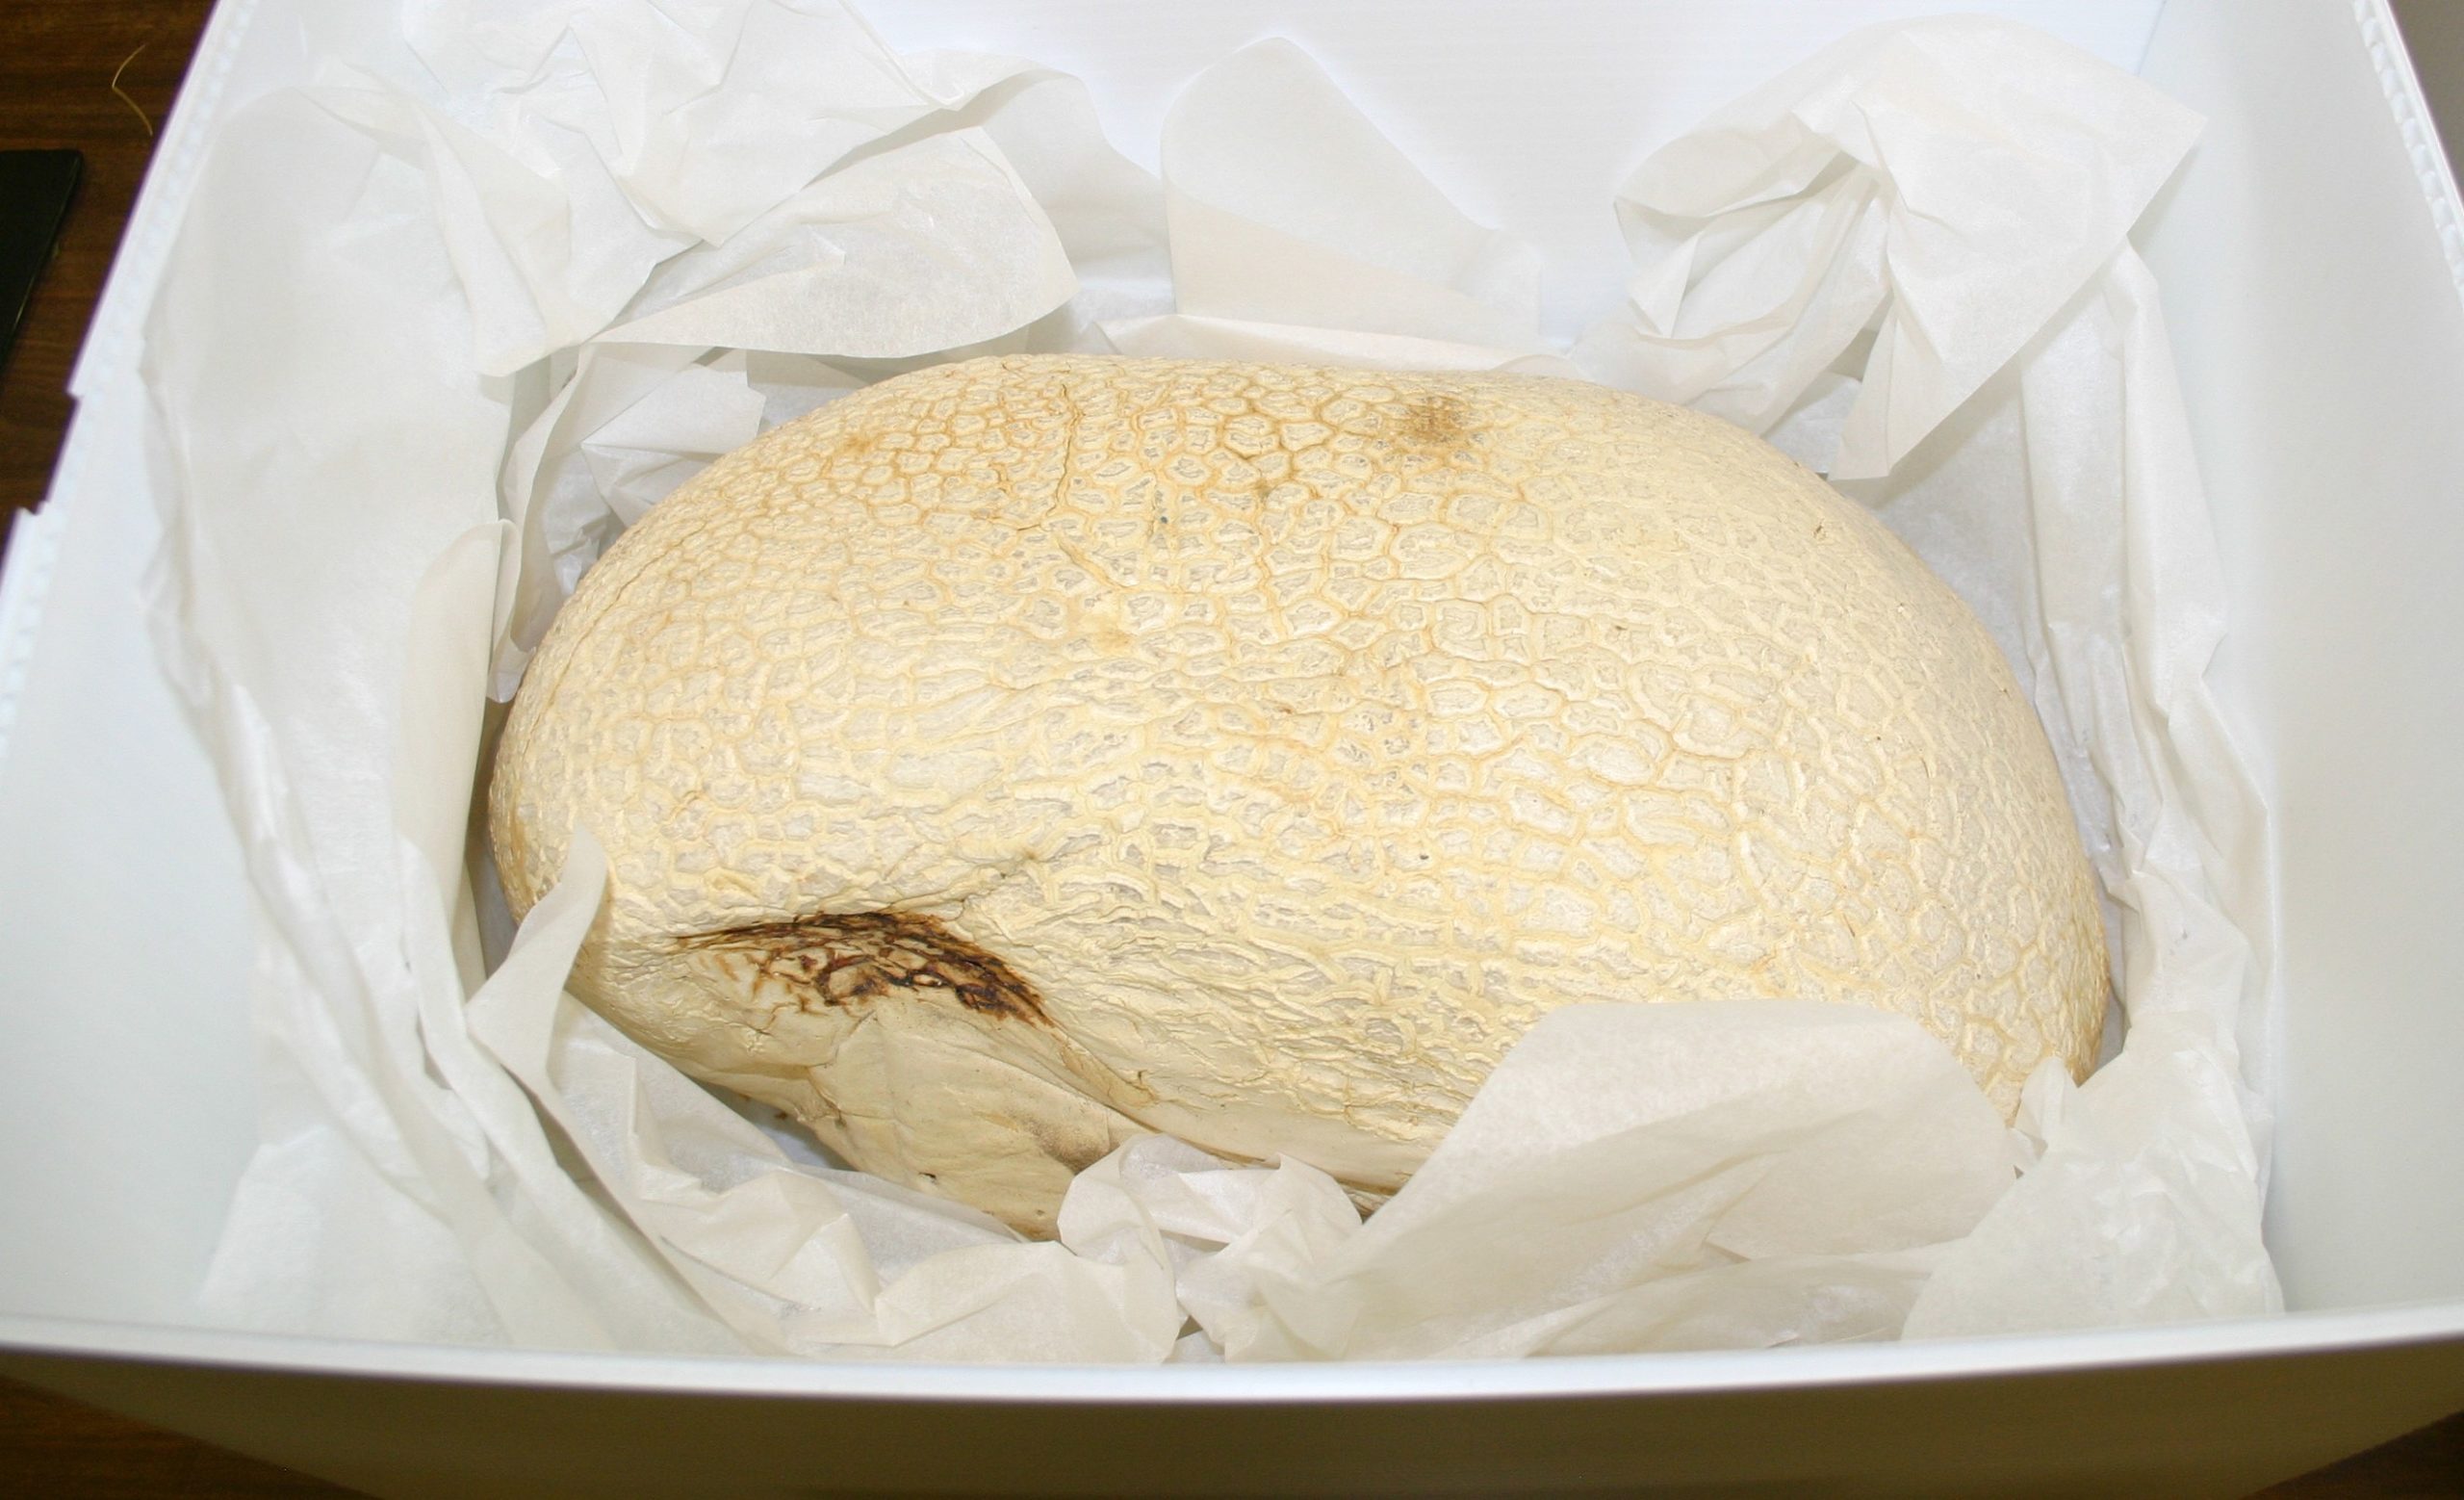 A large white, rounded mushroom carefully packed in a specimen box.